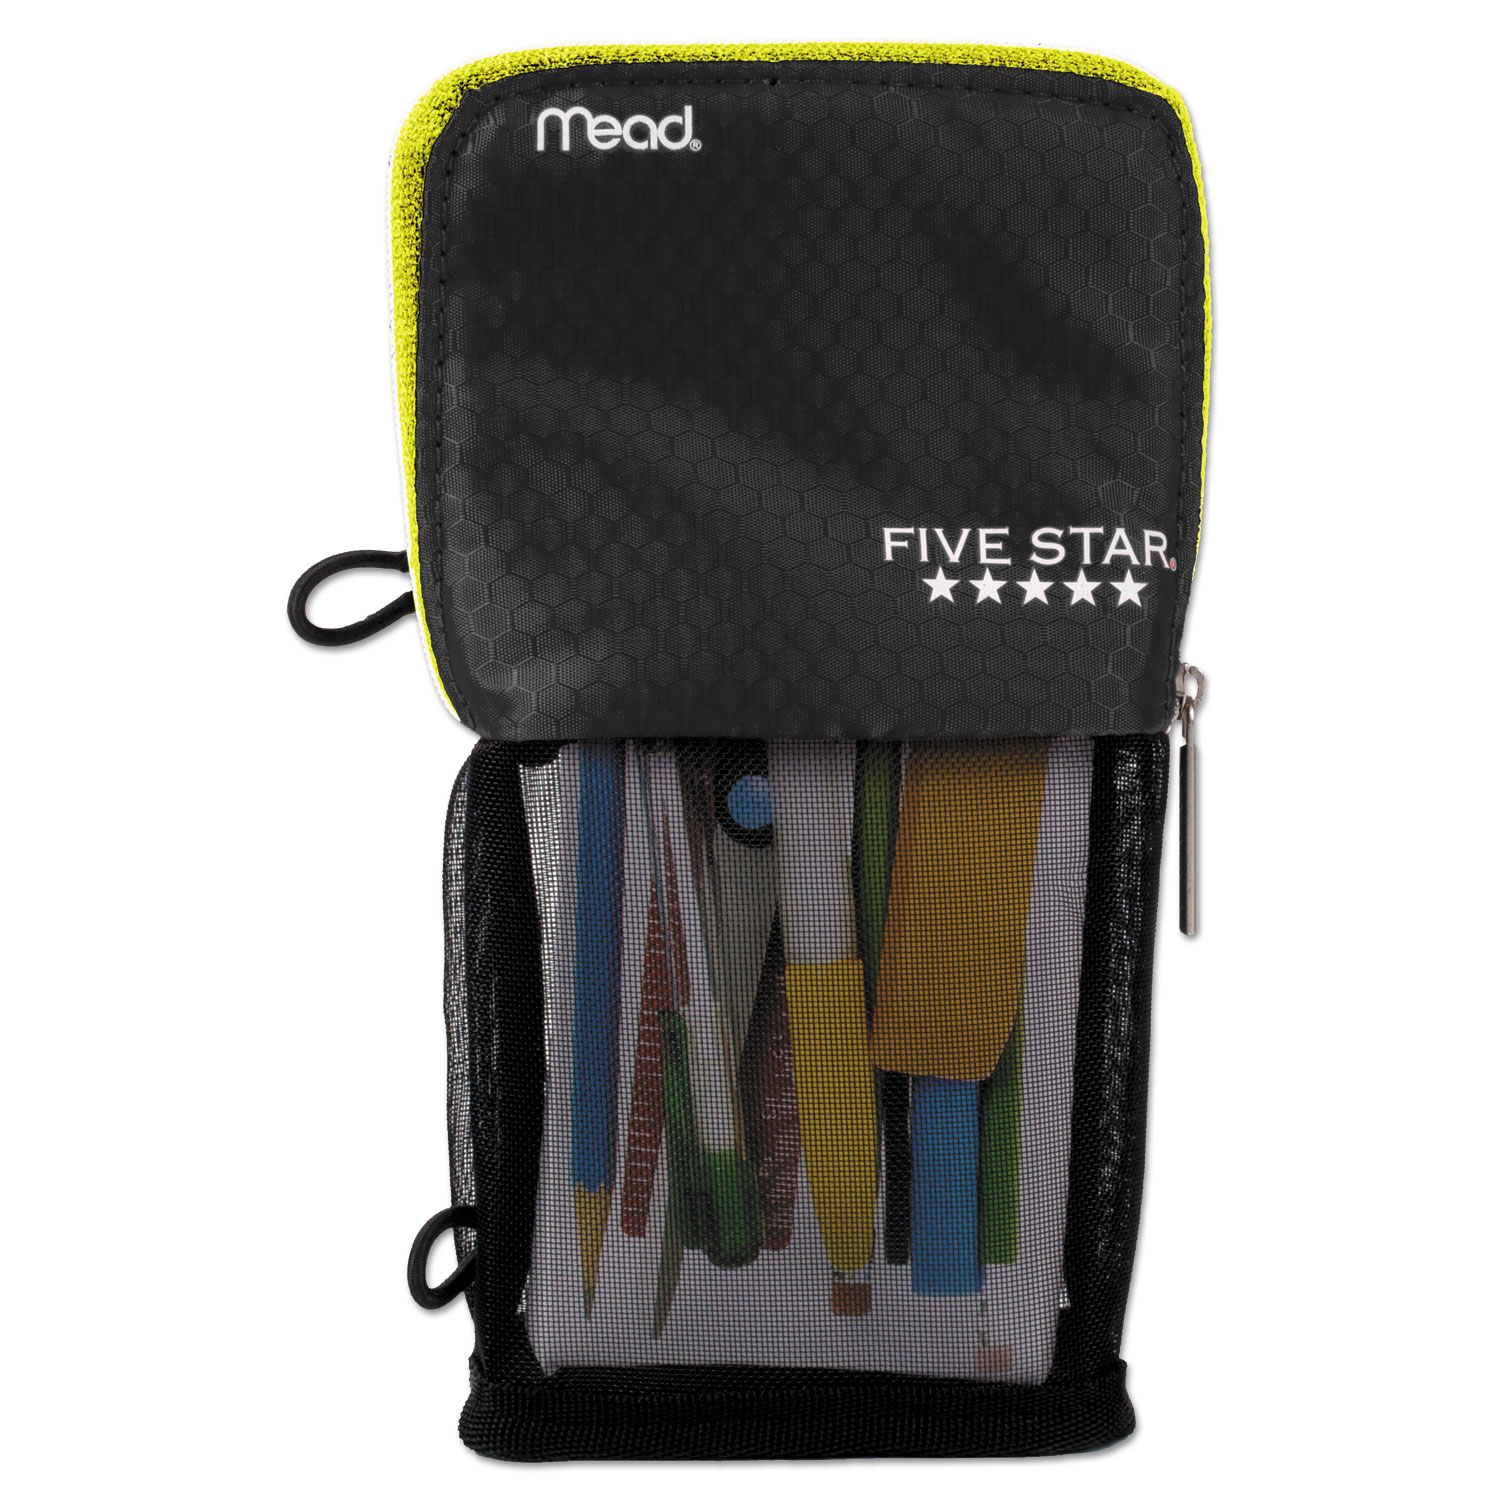 Stand N Store Pencil Pouch, 4 1/2 x 8, Black